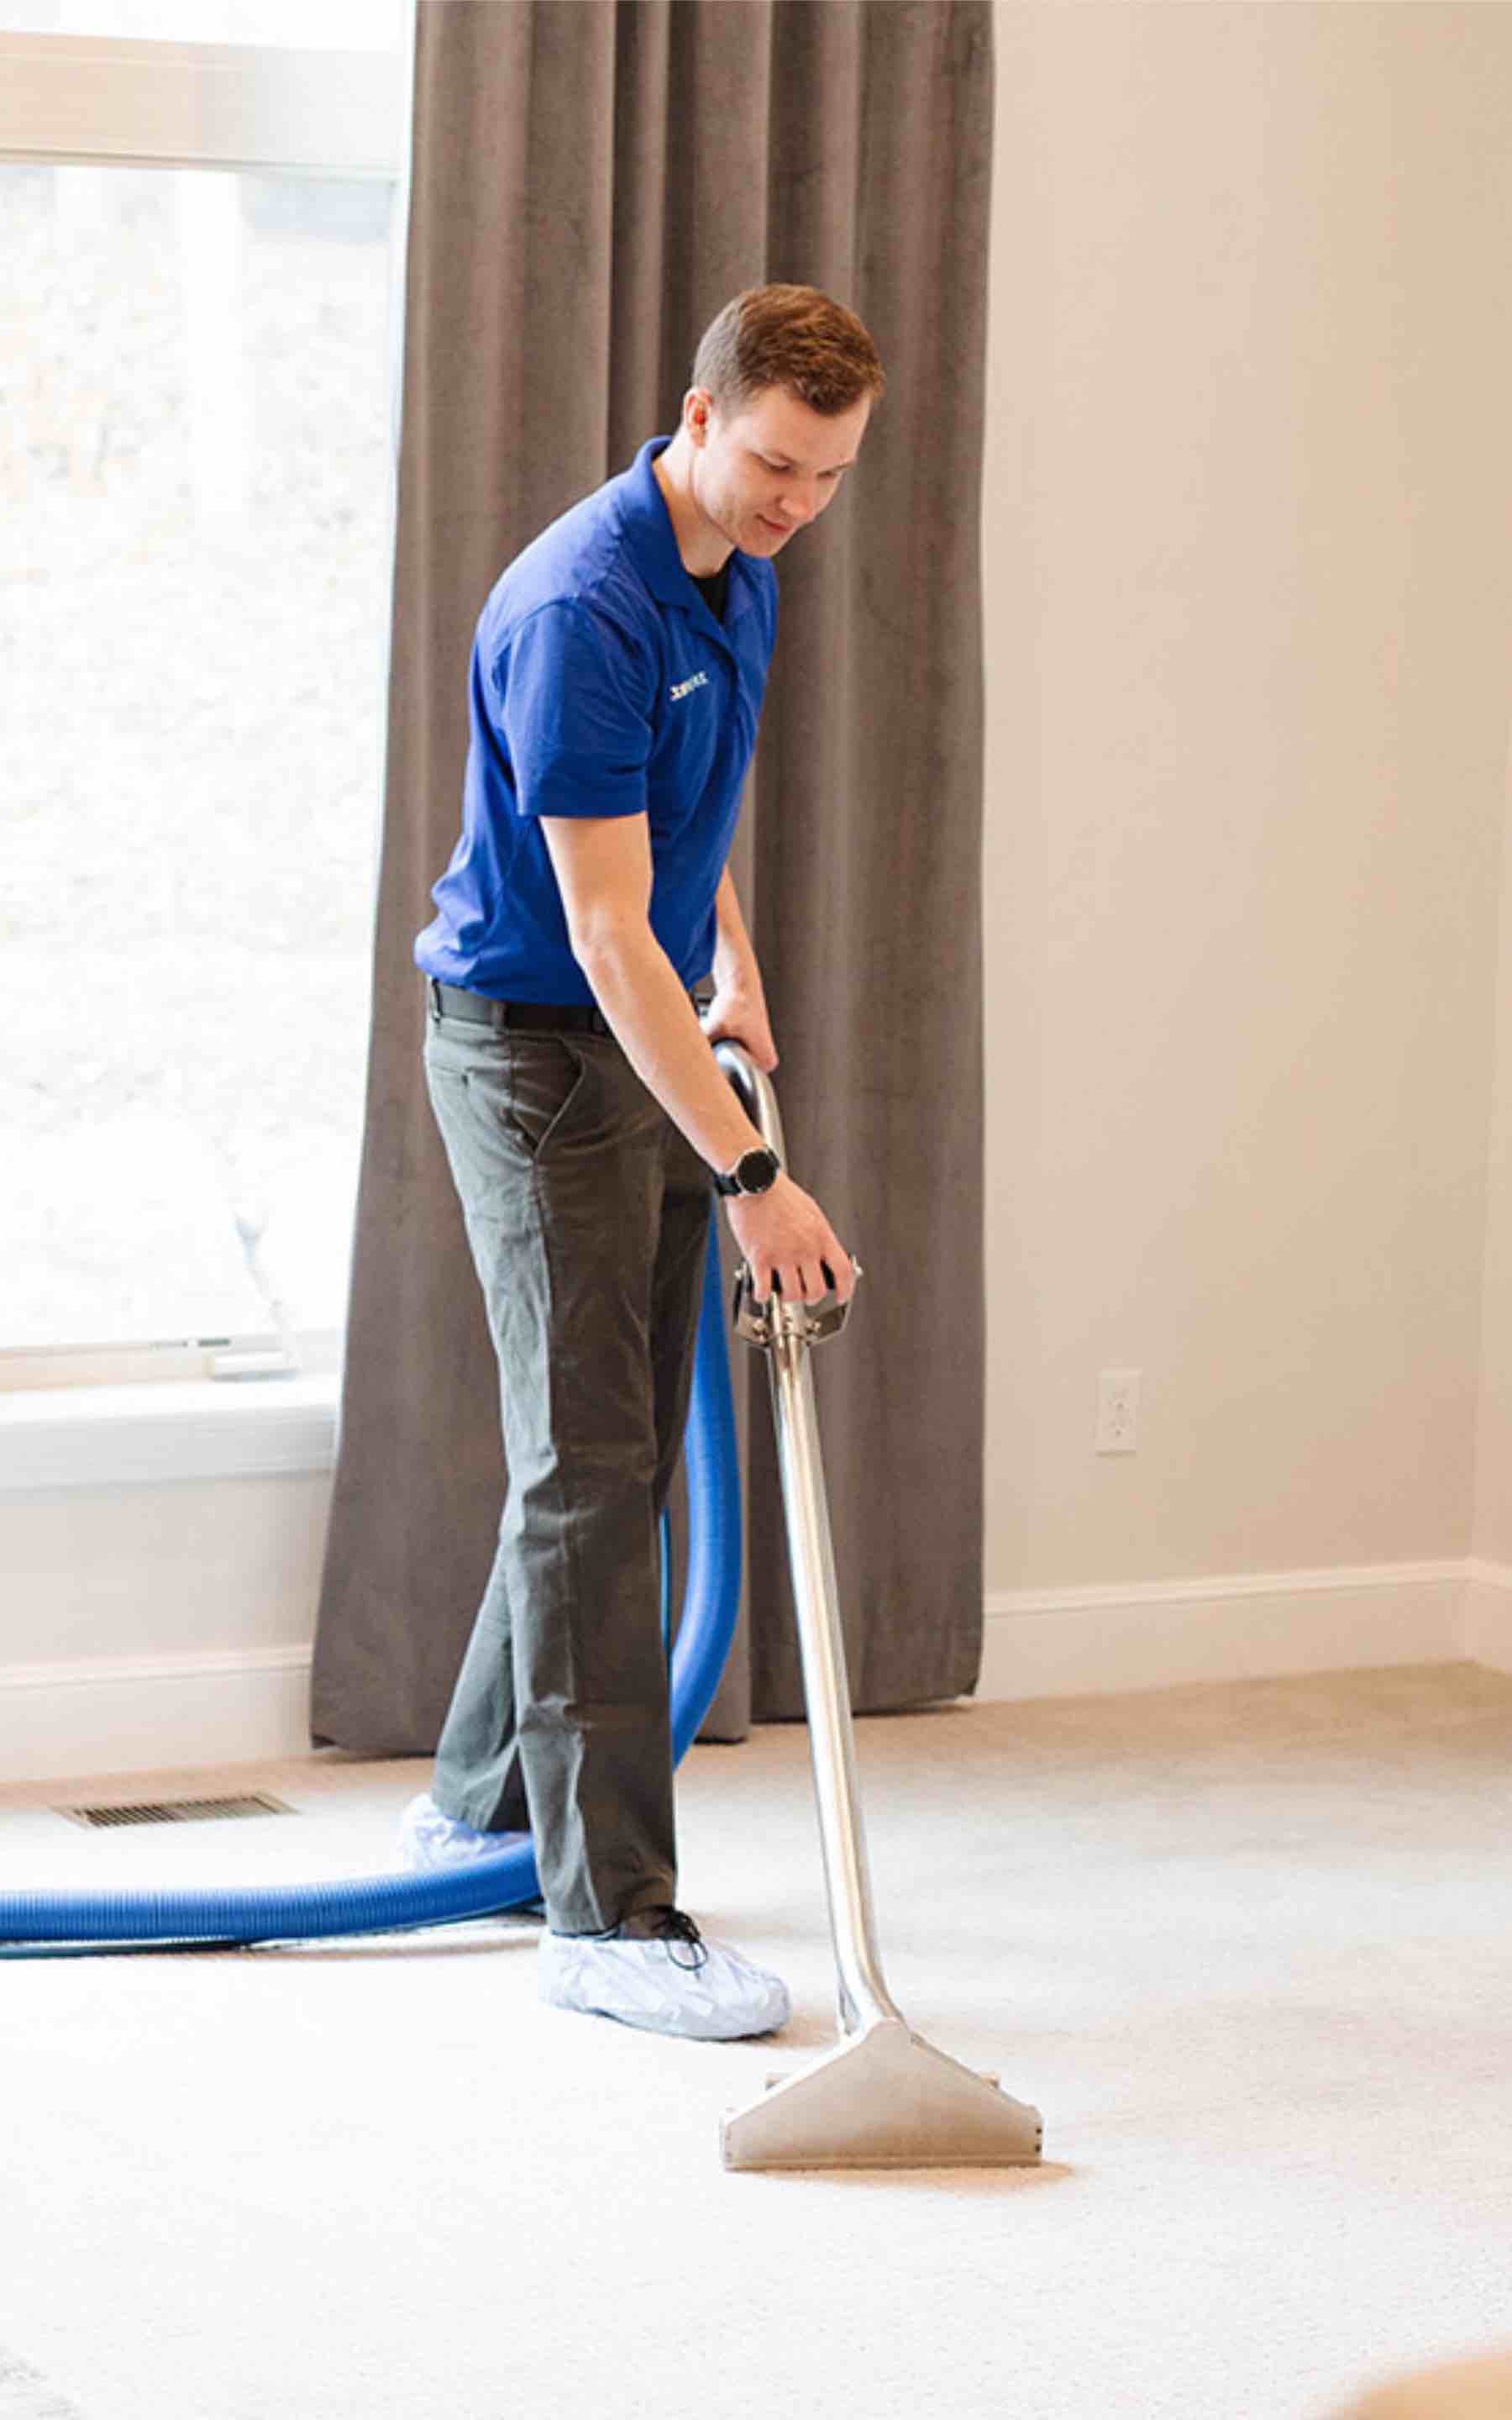 We love playing on carpets with our family so why not make sure they are actually clean with a service from Zerorez.